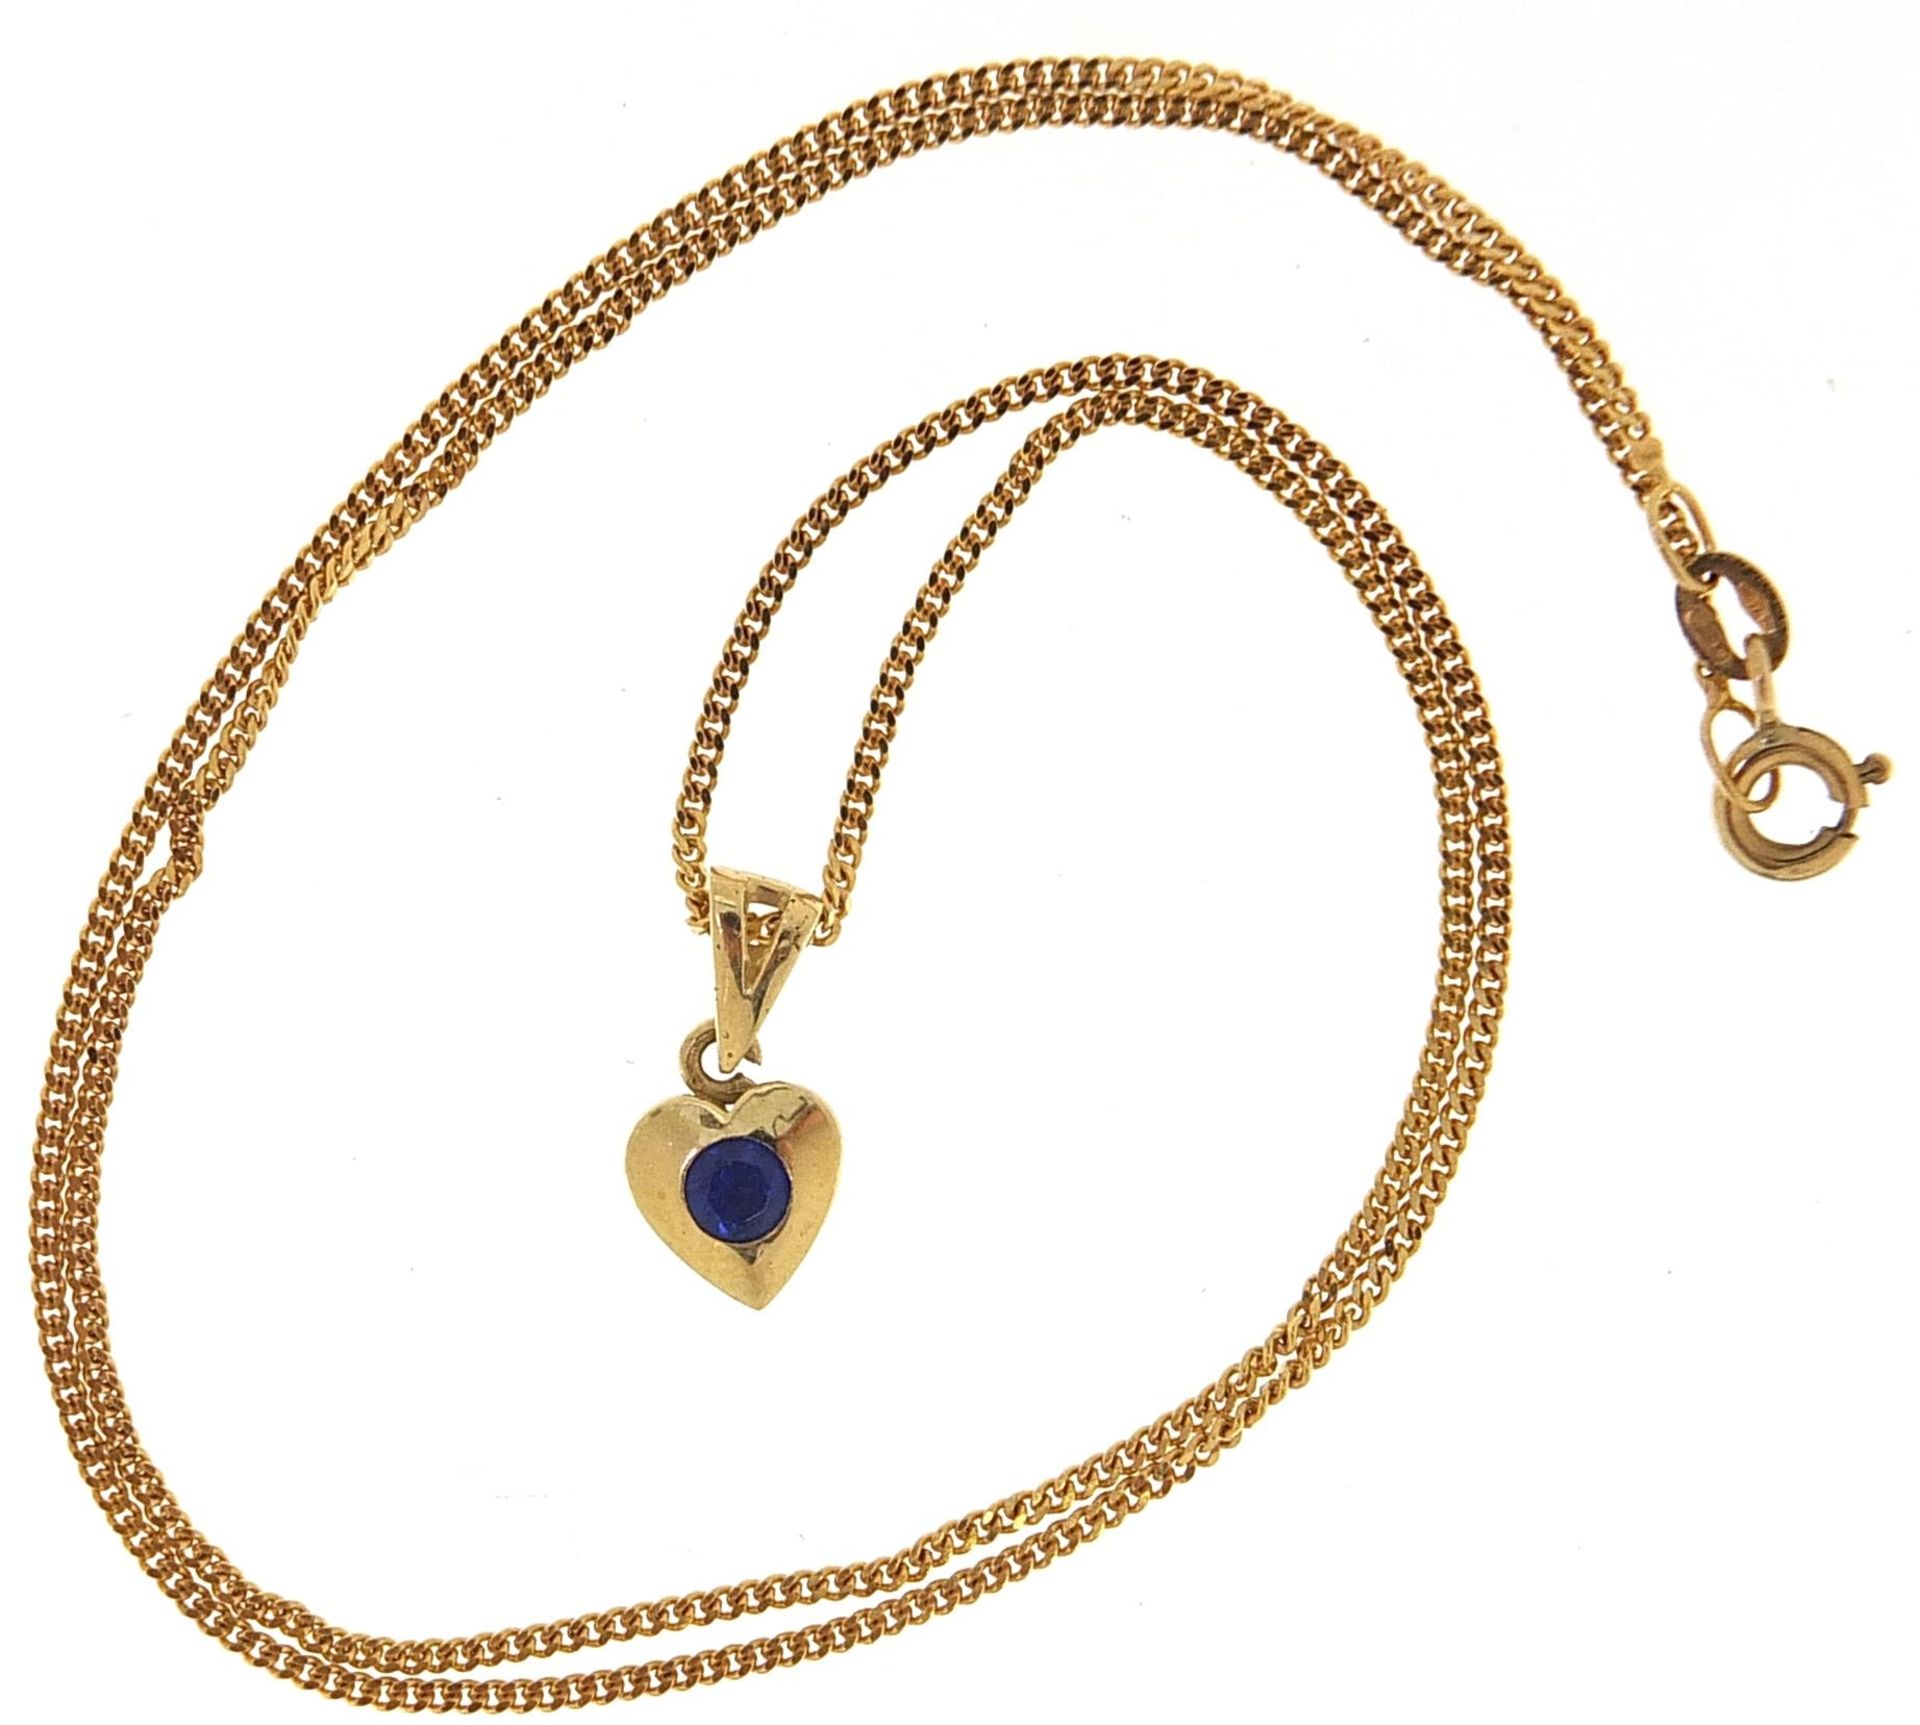 9ct gold necklace with a yellow metal love heart pendant set with a blue stone, 1.4cm high and - Image 2 of 3